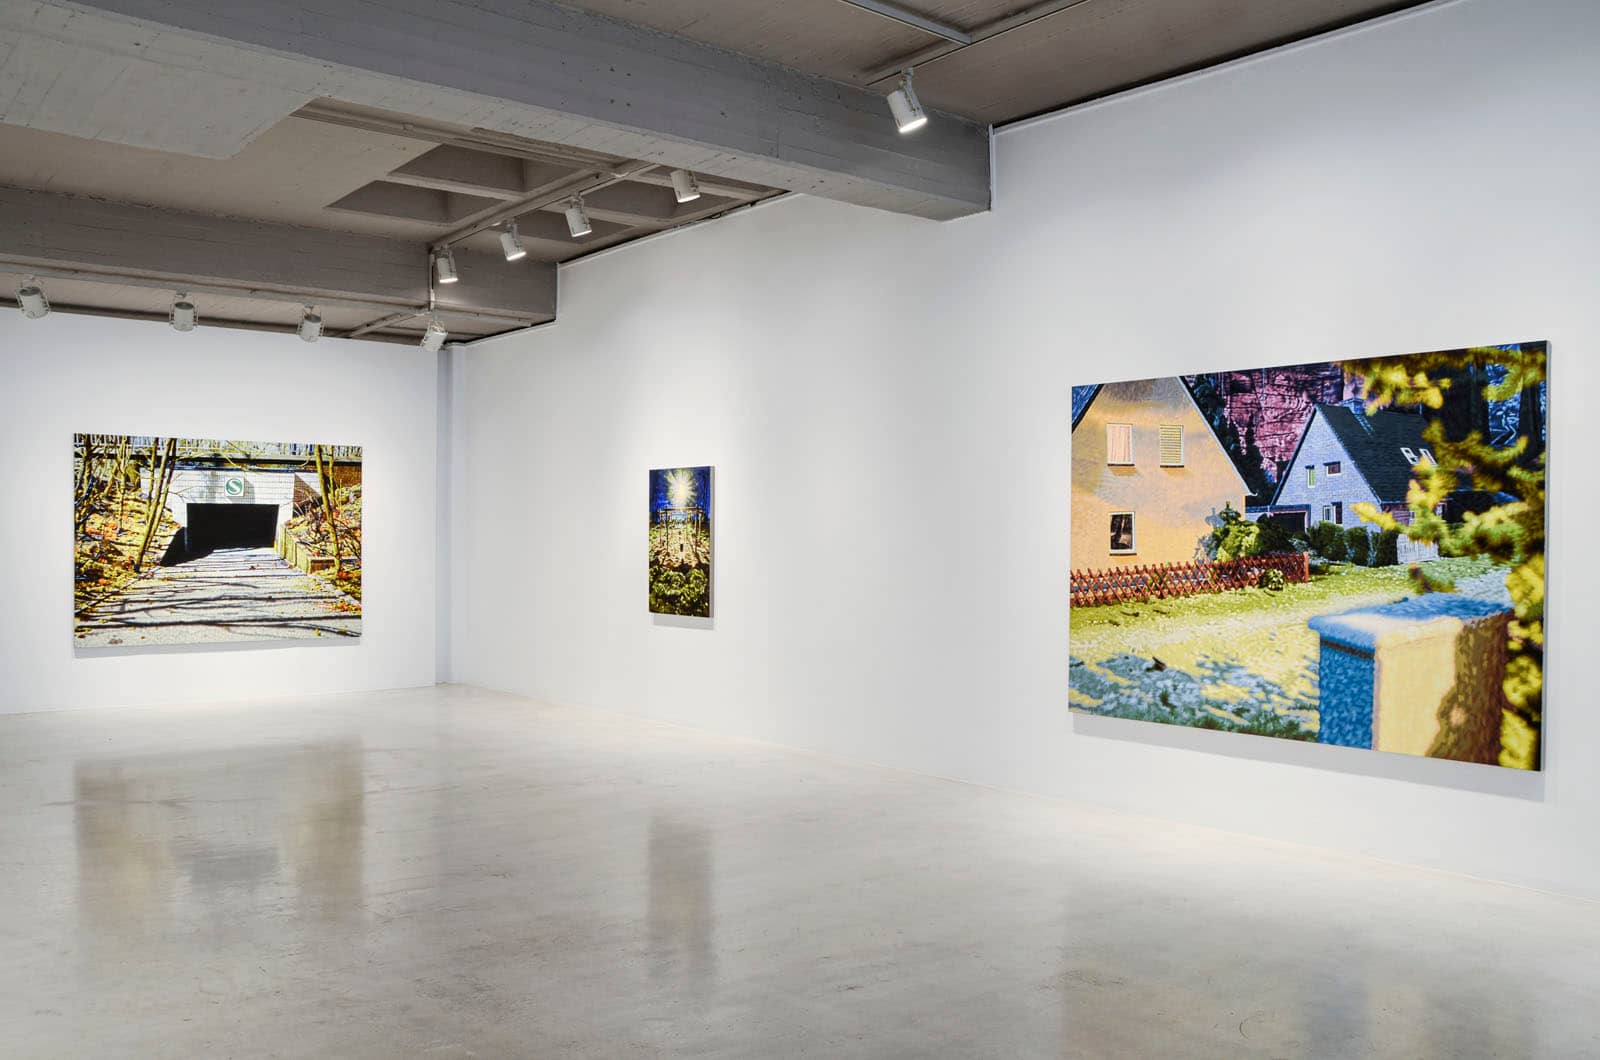 Exhibition view from the solo show "Remote Viewing" by Philipp Fröhlich at Soledad Lorenzo gallery in Madrid, Spain, 2012. The photo shows the main space of the galley with various tempera paintings on canvas.